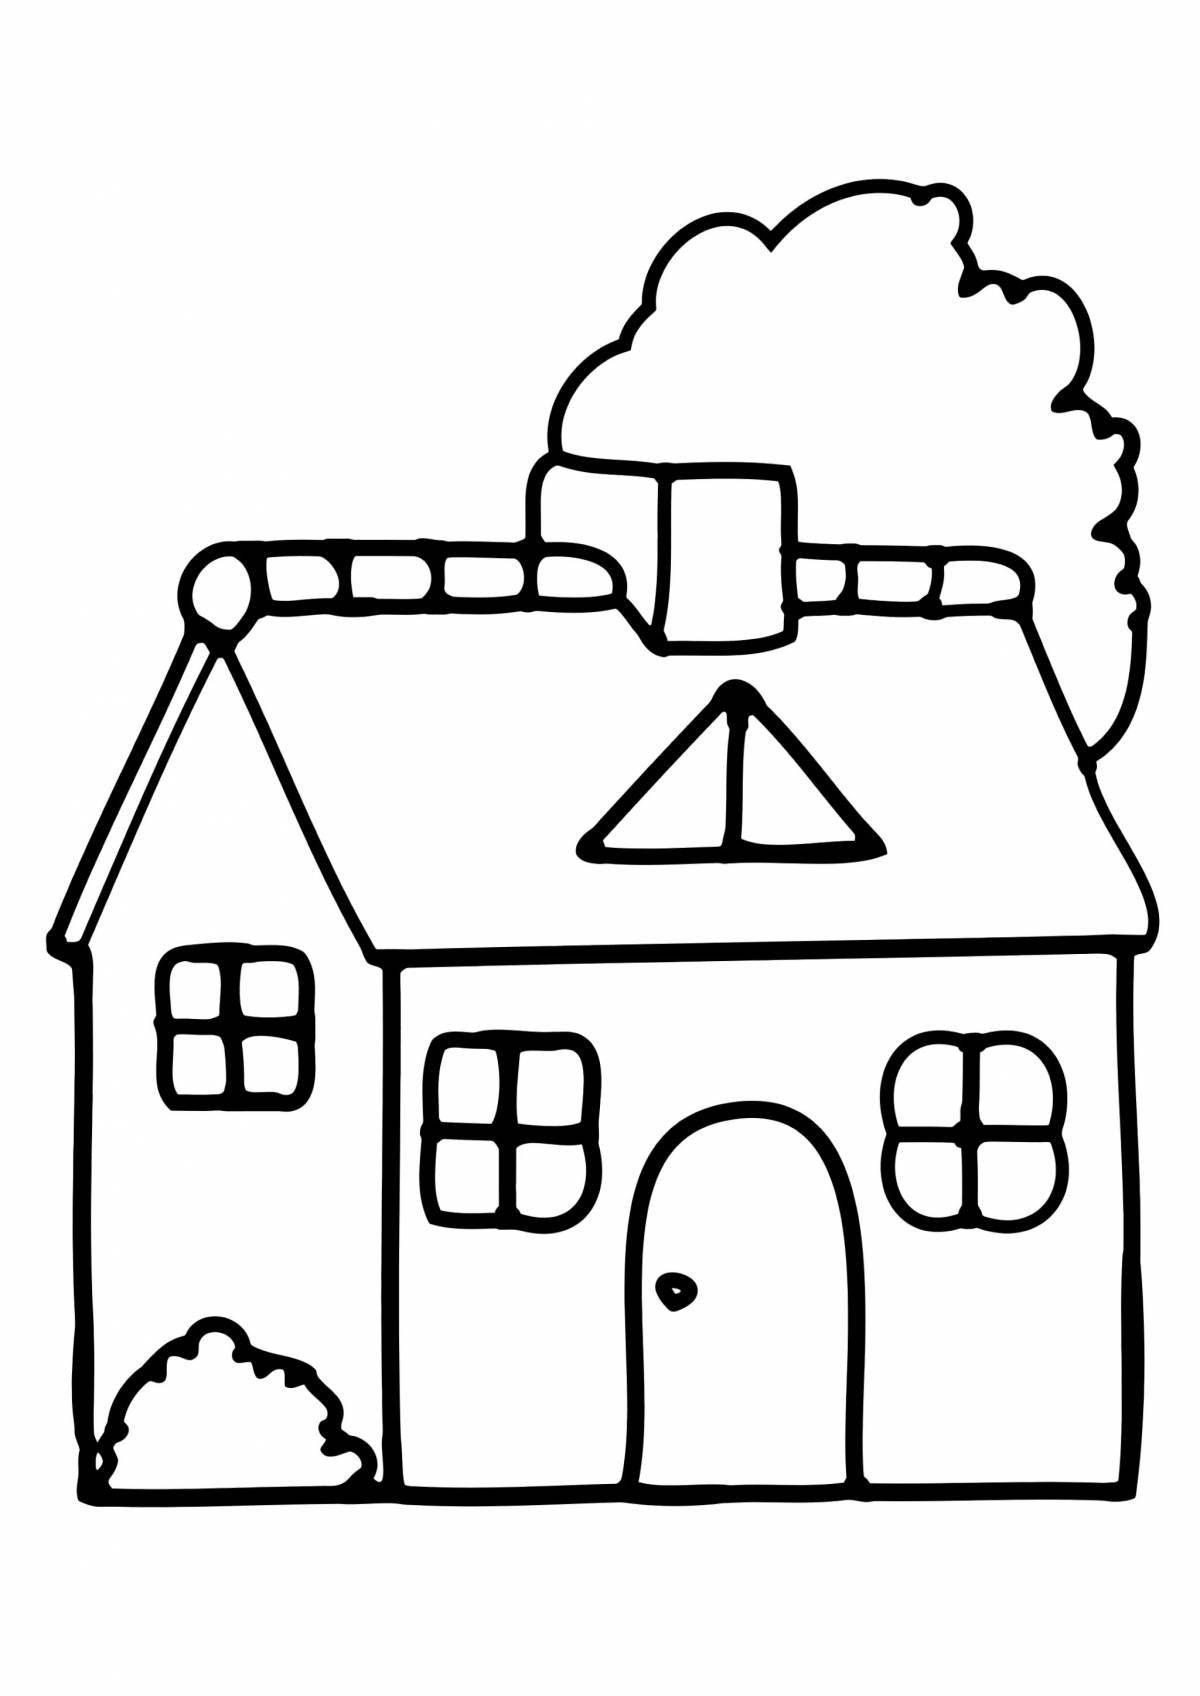 House picture for kids #7